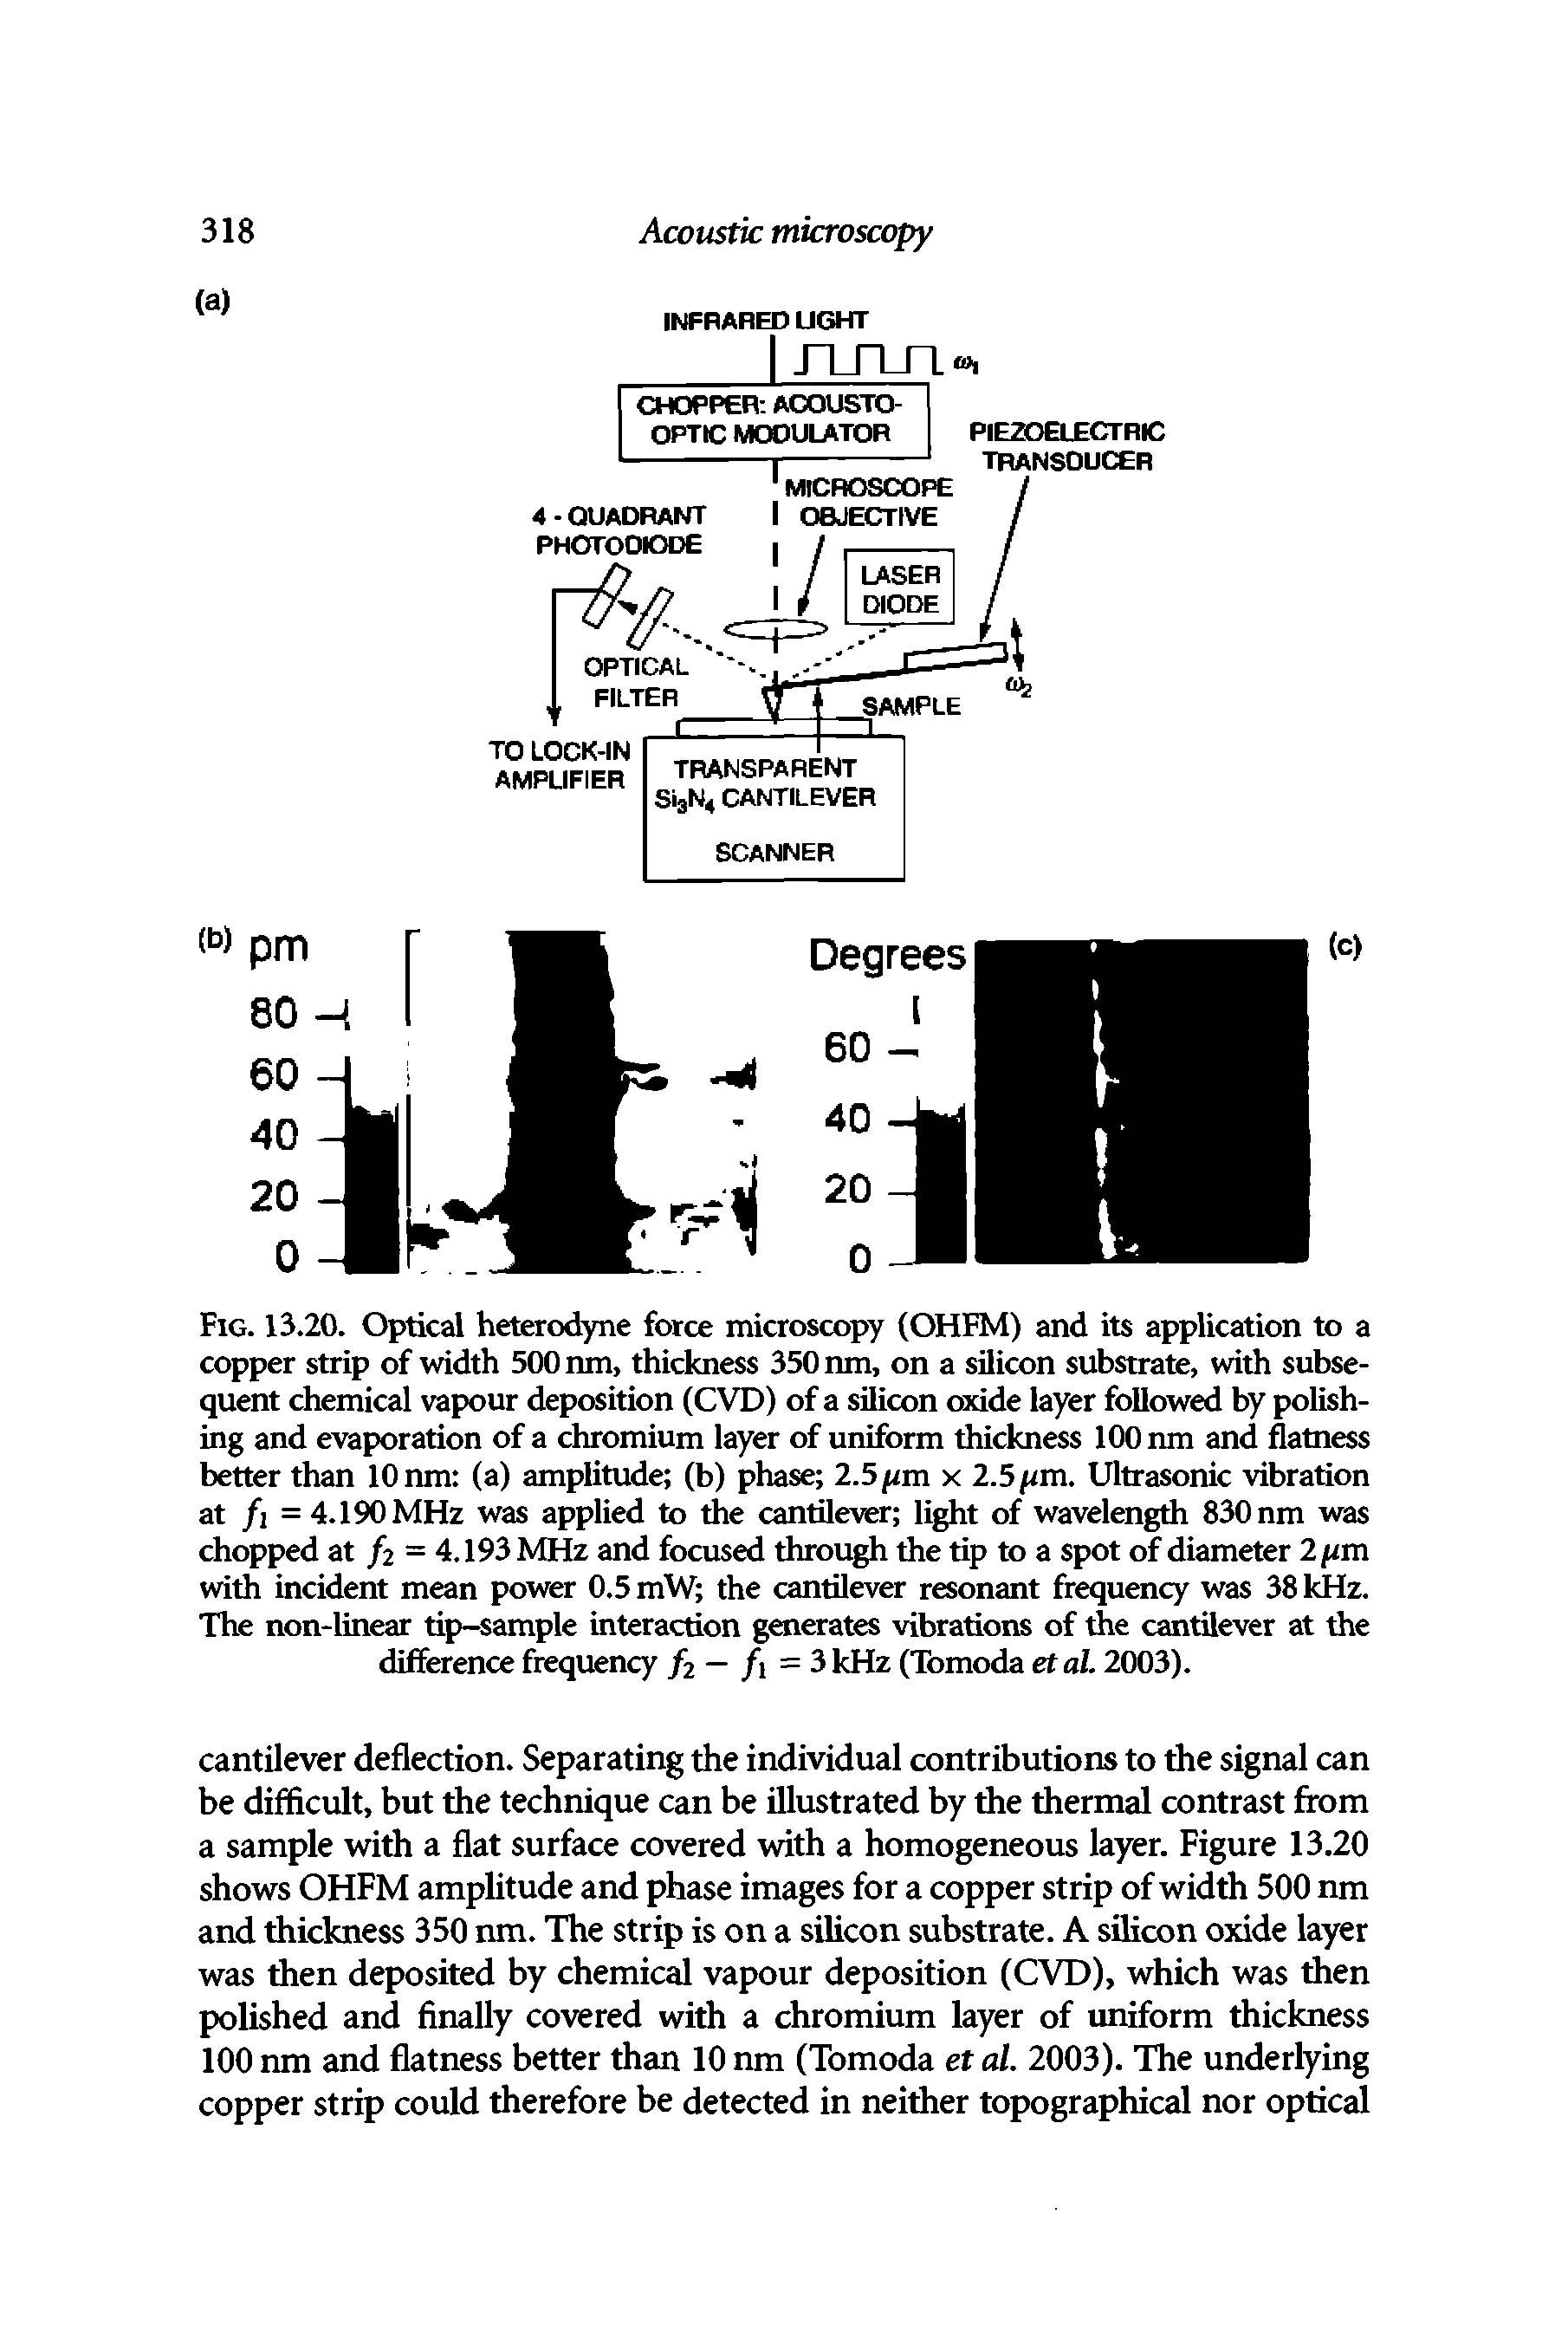 Fig. 13.20. Optical heterodyne force microscopy (OHFM) and its application to a copper strip of width 500 nm, thickness 350 nm, on a silicon substrate, with subsequent chemical vapour deposition (CVD) of a silicon oxide layer followed by polishing and evaporation of a chromium layer of uniform thickness 100 nm and flatness better than 10 nm (a) amplitude (b) phase 2.5 [im x 2.5 m. Ultrasonic vibration at fi = 4.190 MHz was applied to the cantilever light of wavelength 830 nm was chopped at fo = 4.193 MHz and focused through the tip to a spot of diameter 2 im with incident mean power 0.5 mW the cantilever resonant frequency was 38 kHz. The non-linear tip-sample interaction generates vibrations of the cantilever at the difference frequency f2 — f = 3 kHz (Tomoda et al. 2003).